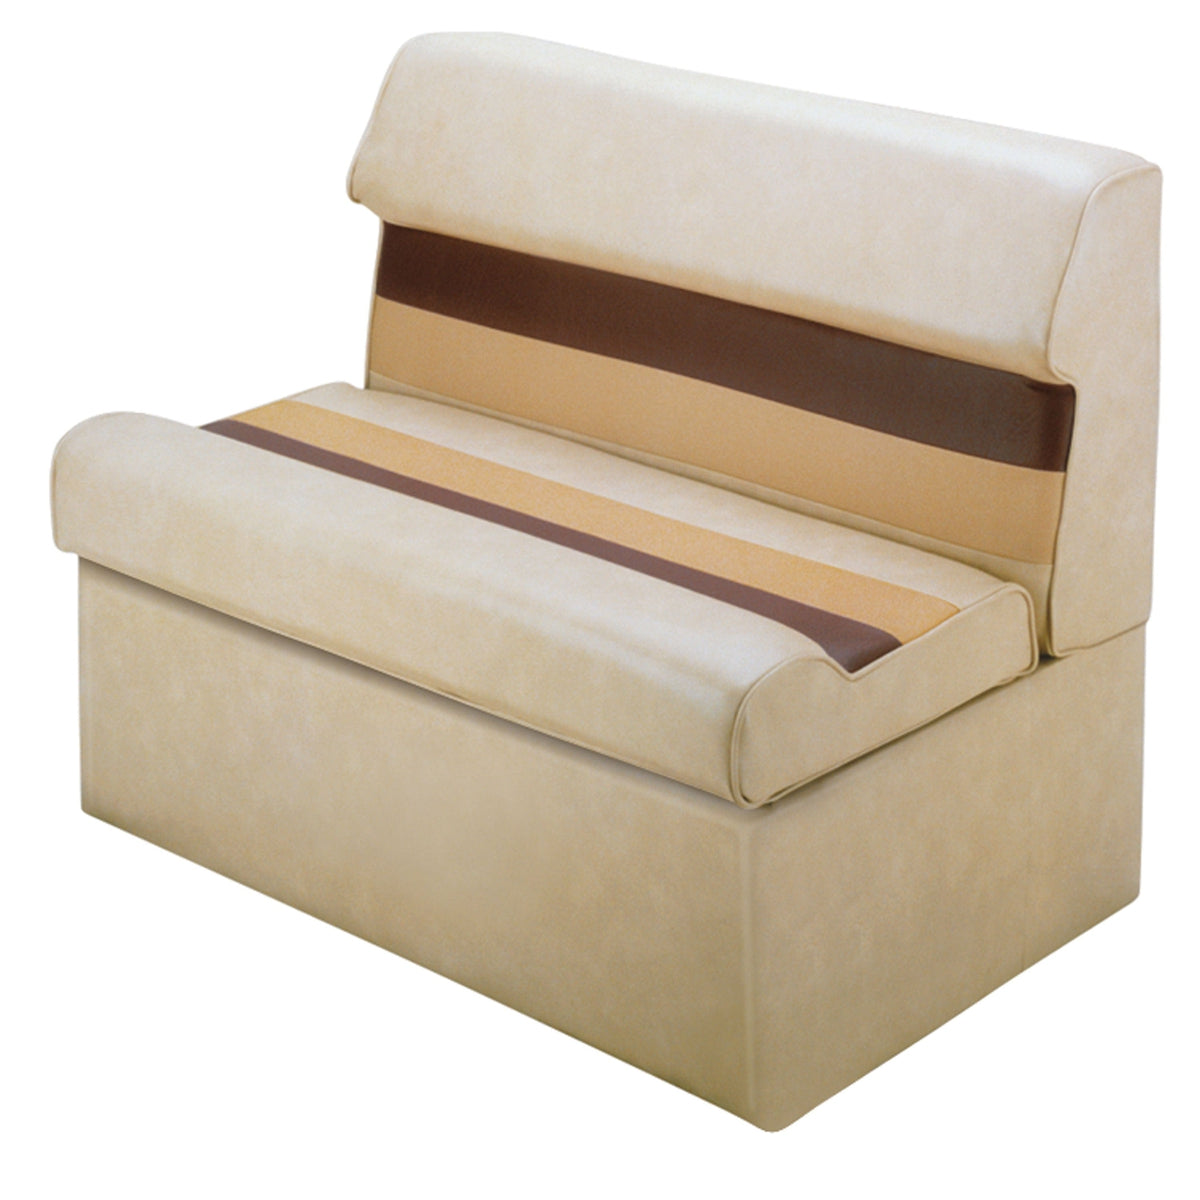 Wise Oversized - Not Qualified for Free Shipping Wise 36" Lounge Seat Sand #8WD100-1010